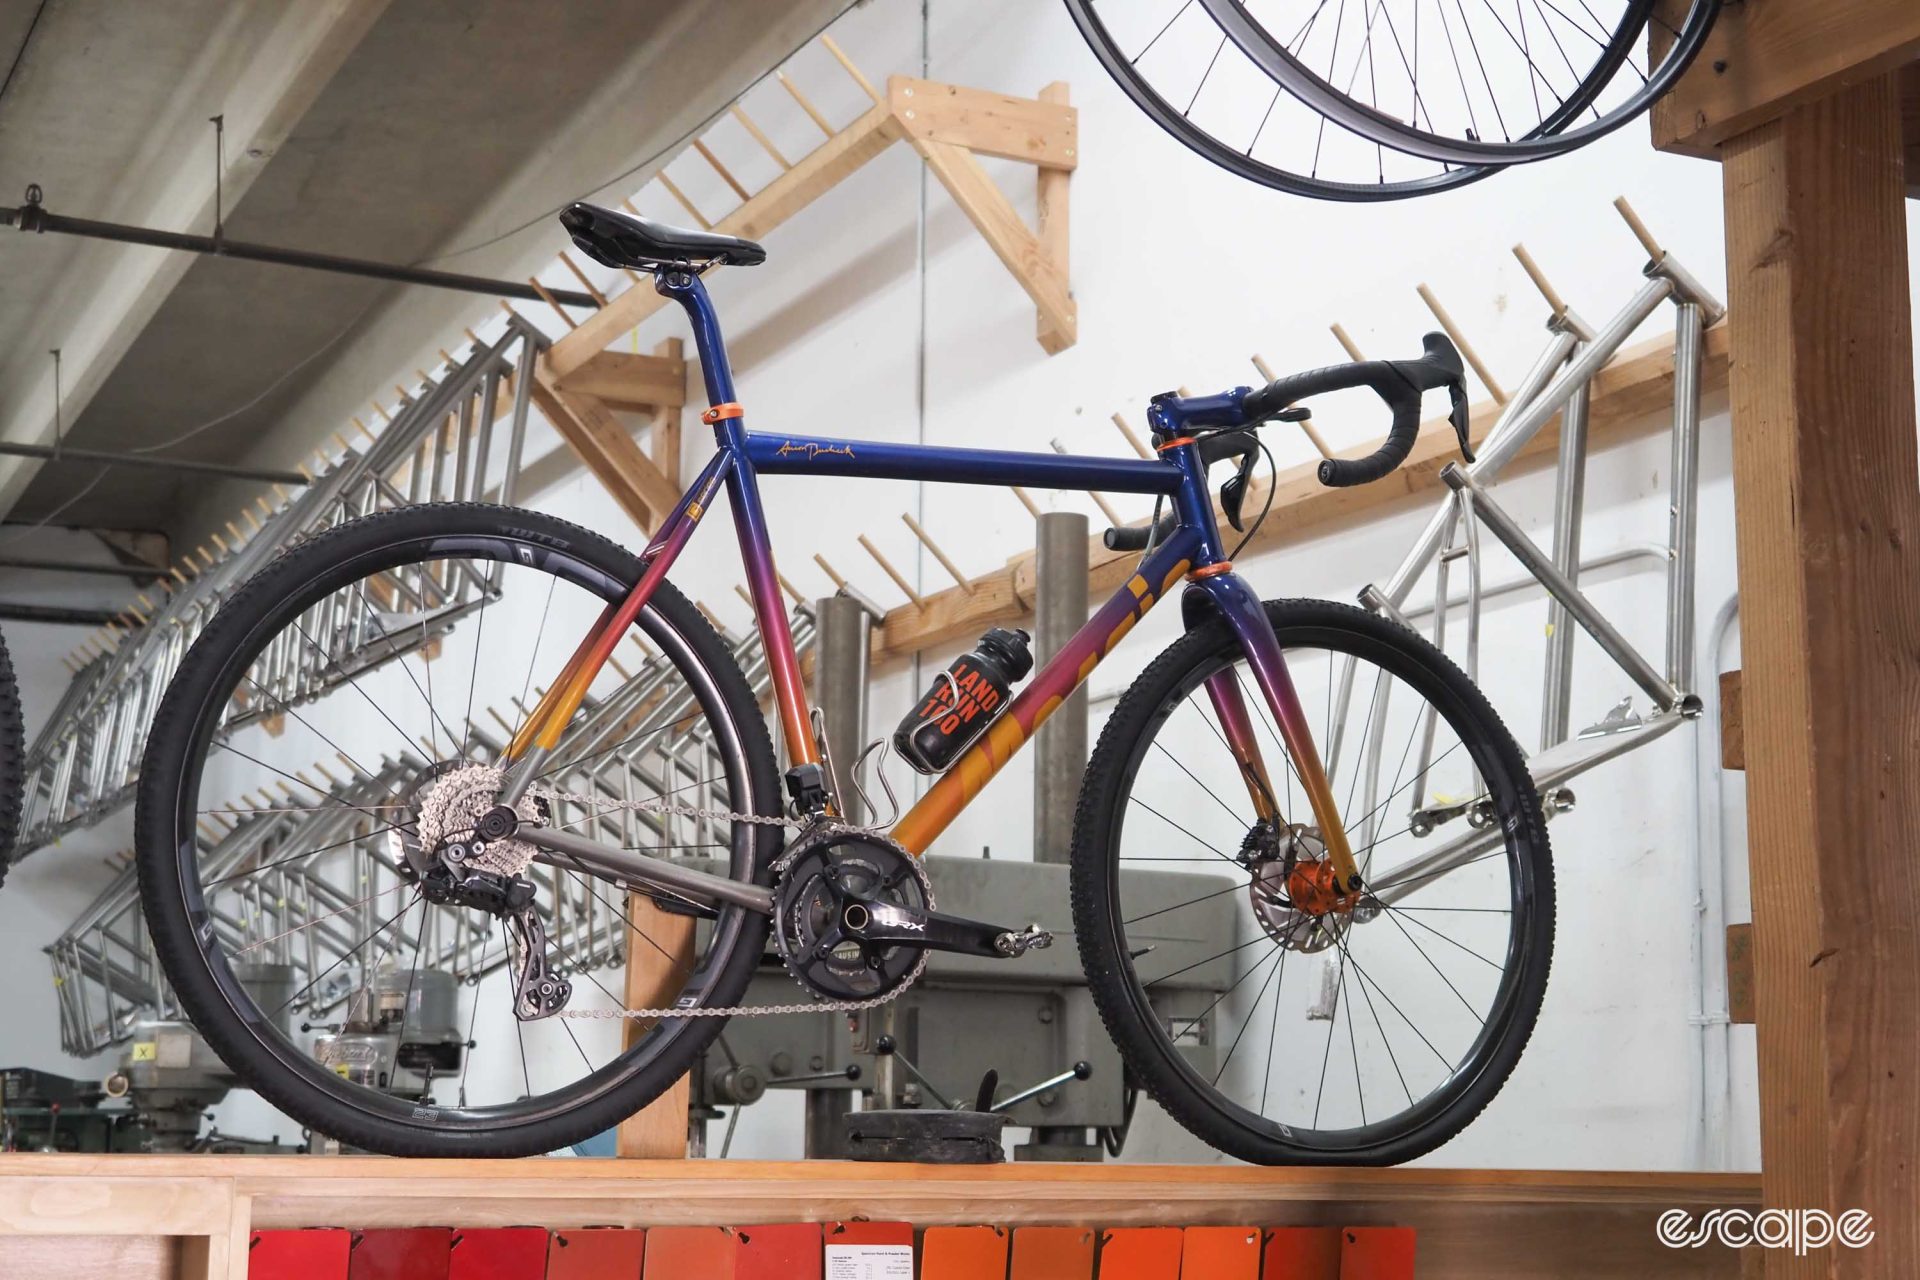 A gravel bike finished in a blue to red to orange fade.